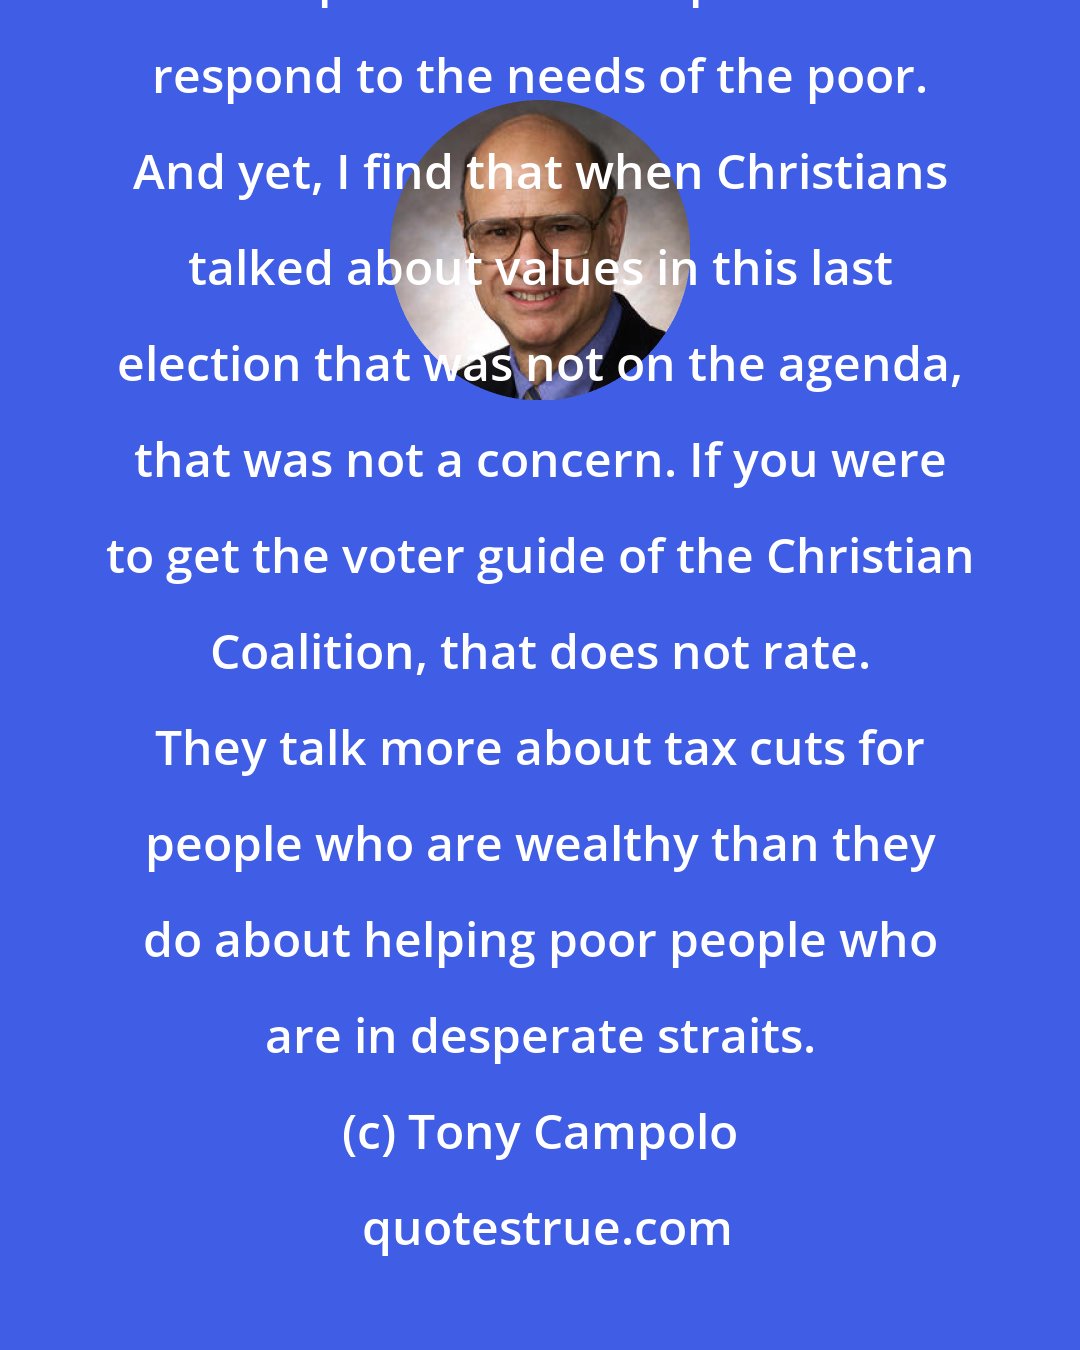 Tony Campolo: Jesus refers to the poor over and over again. There are 2,000 verses of Scripture that call upon us to respond to the needs of the poor. And yet, I find that when Christians talked about values in this last election that was not on the agenda, that was not a concern. If you were to get the voter guide of the Christian Coalition, that does not rate. They talk more about tax cuts for people who are wealthy than they do about helping poor people who are in desperate straits.